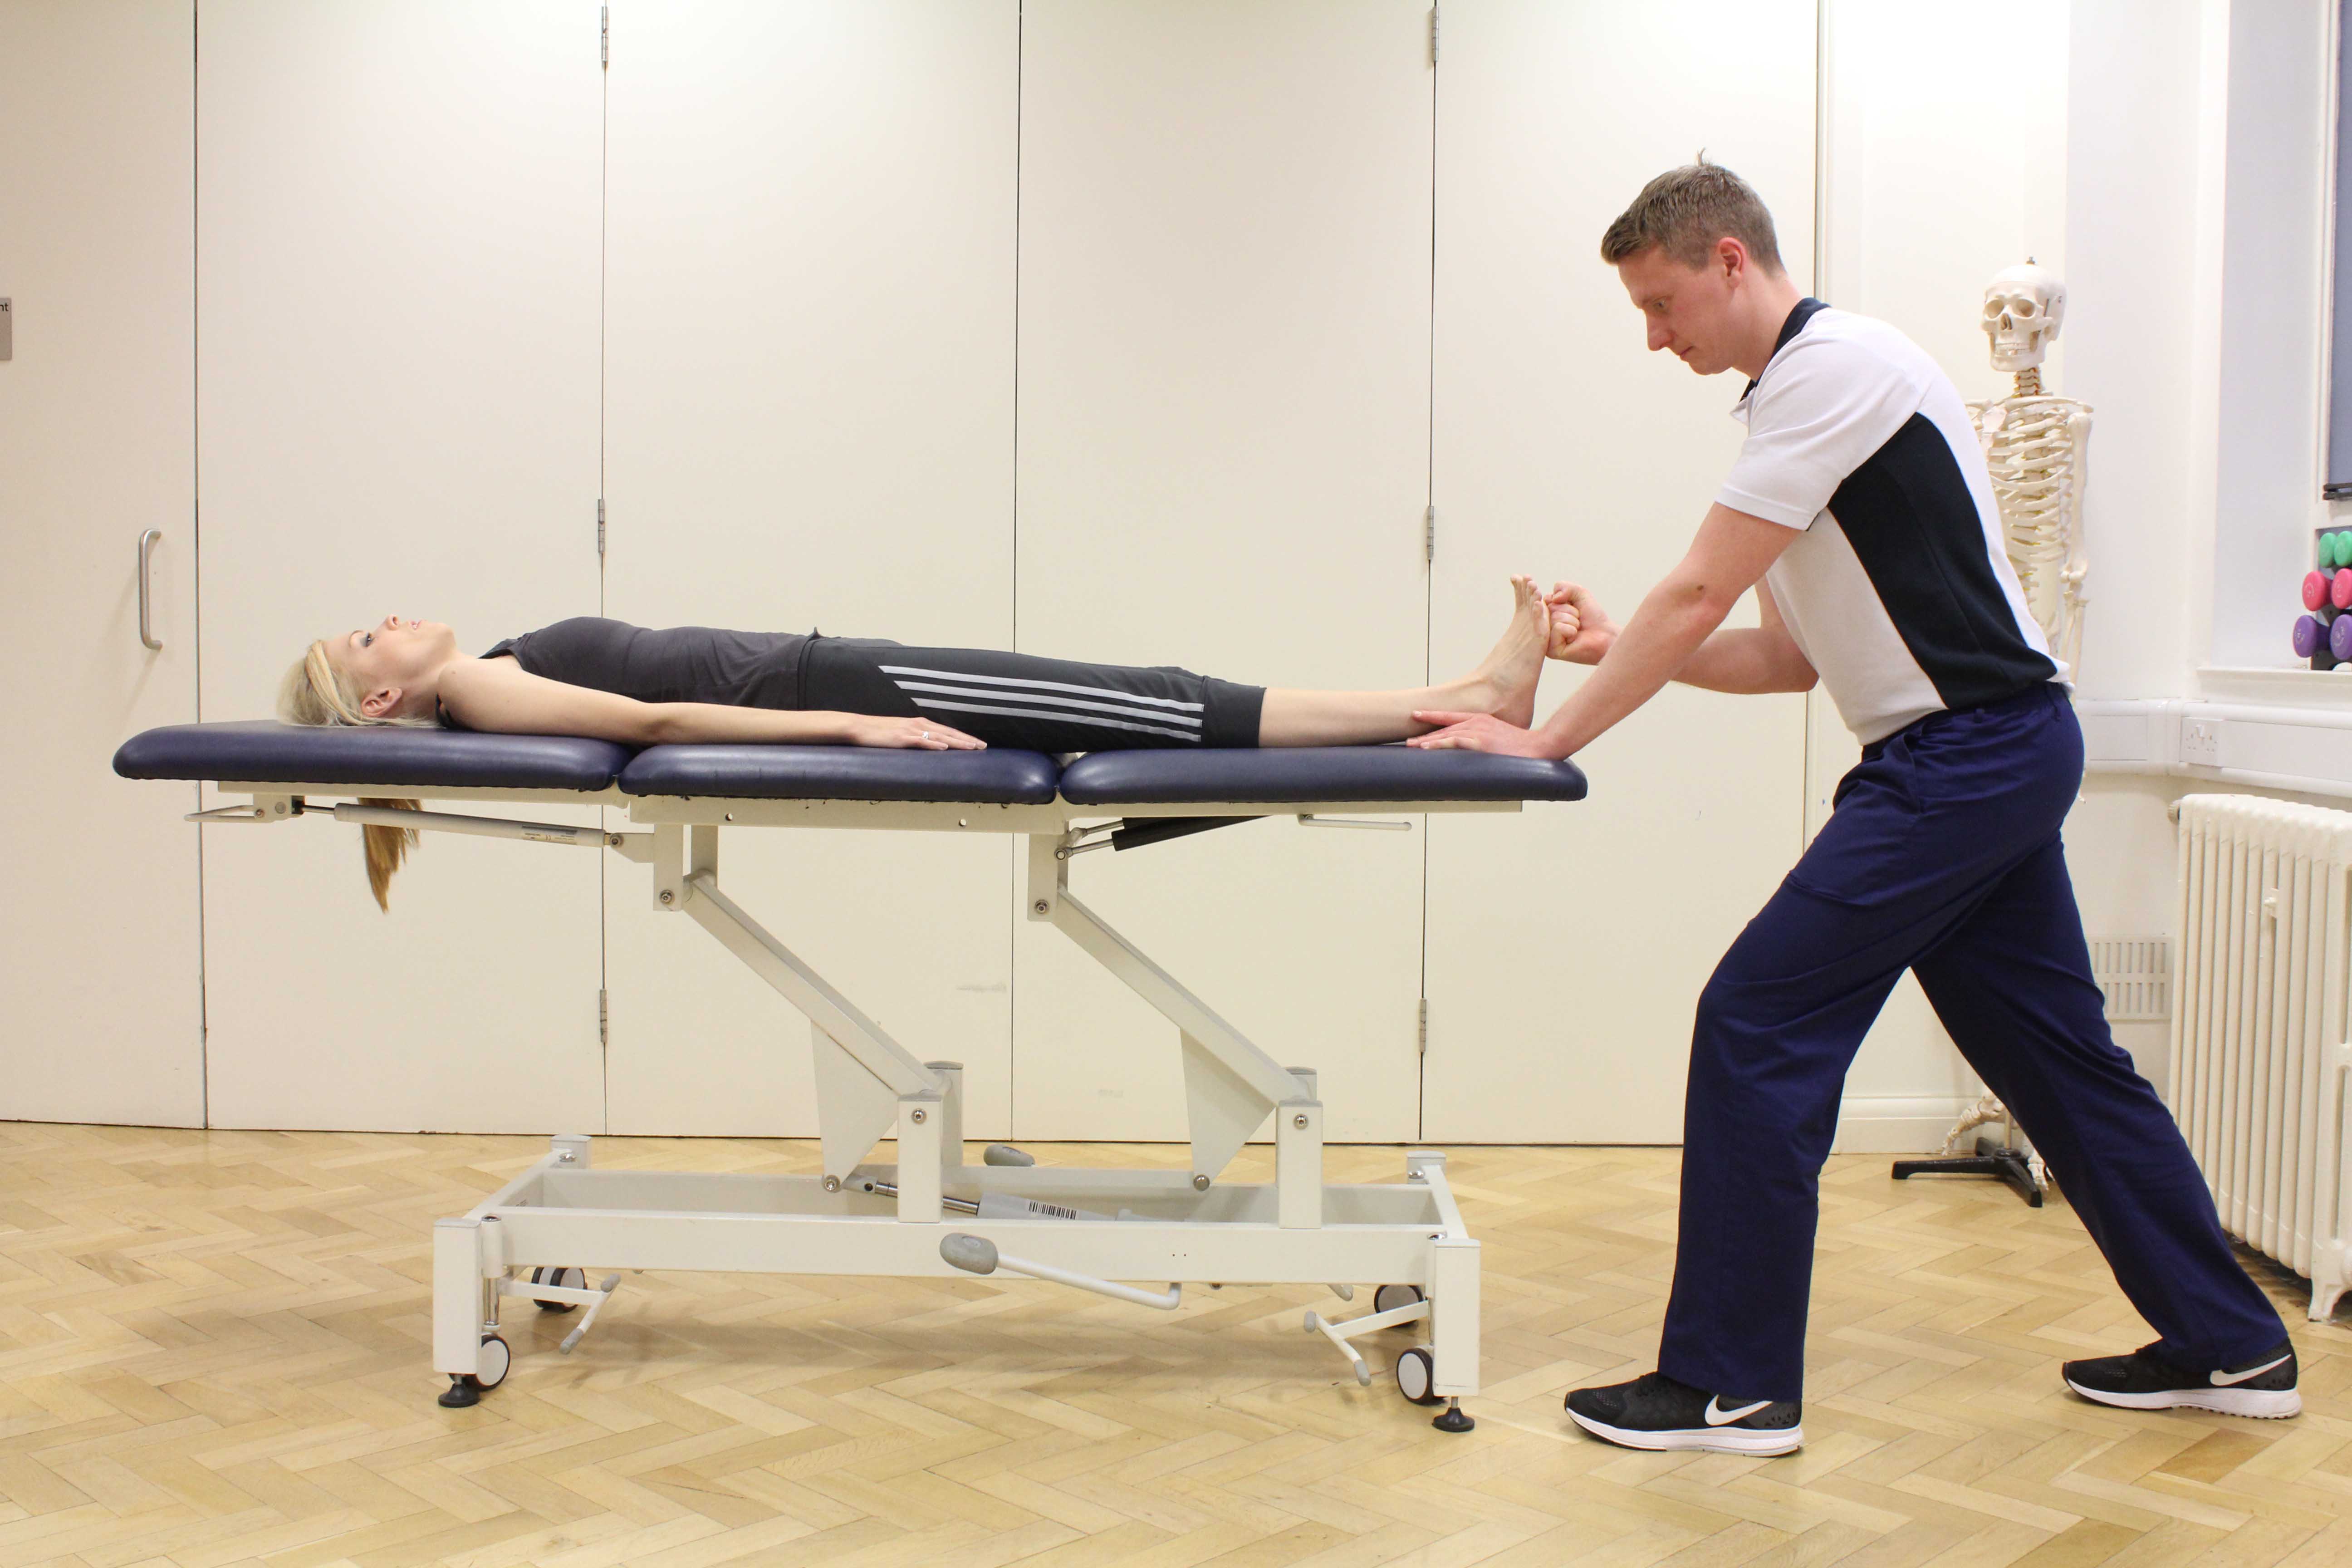 Foot and ankle assessment conducted by specialist MSK physiotherapist